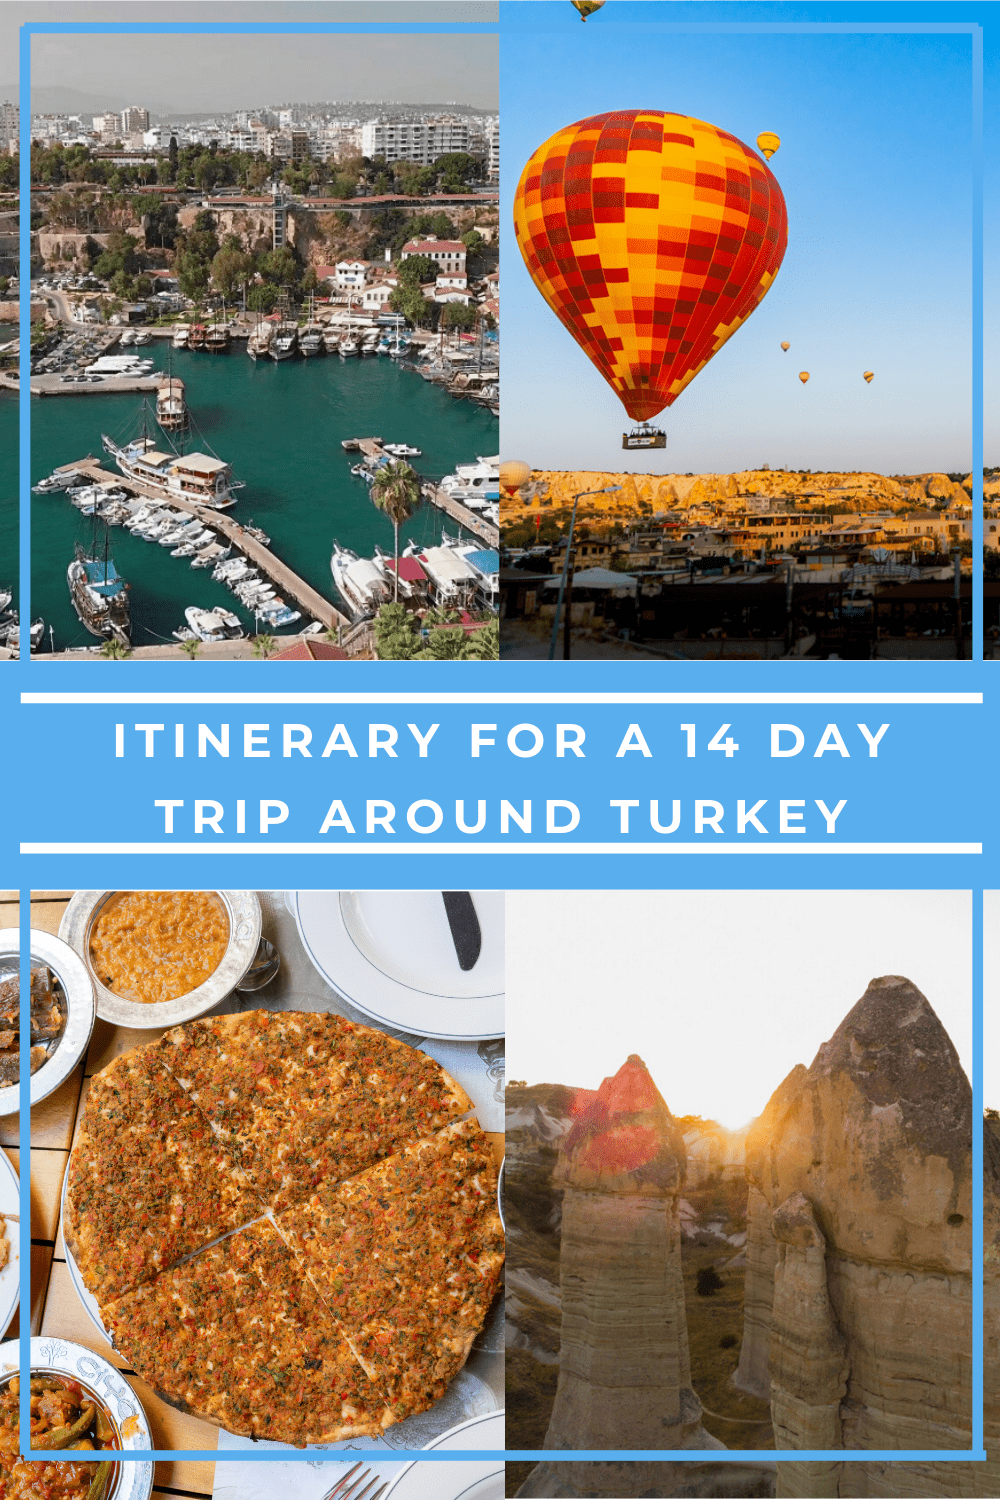 Itinerary for a 14 day Trip Around Turkey